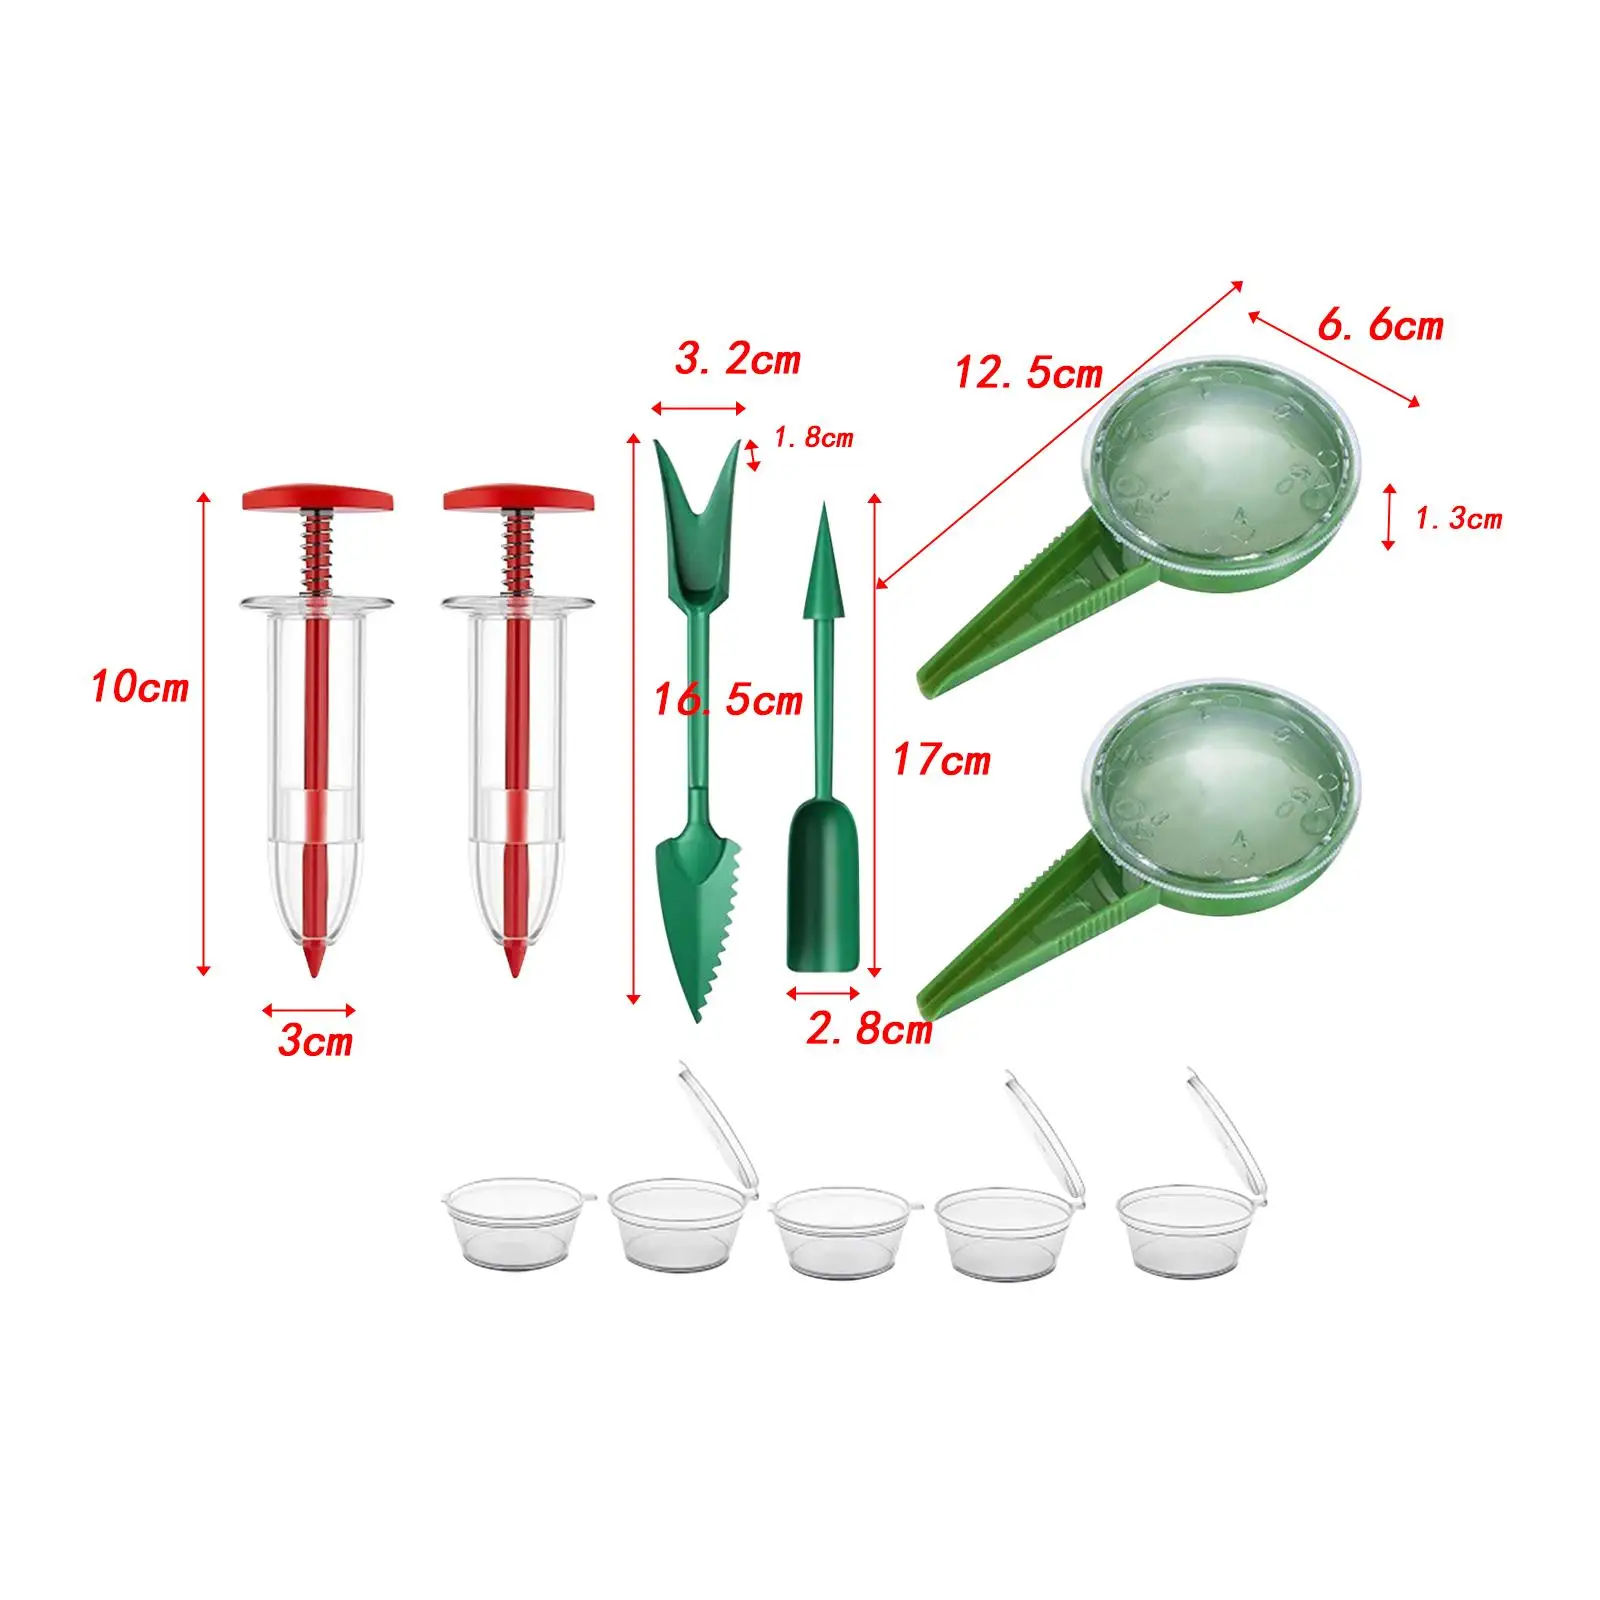 Mini Seed Spreader Set Lightweight Planter Tool Small Reusable Seed Spreading Handheld Seed Planter Seedling Dibber and Widger